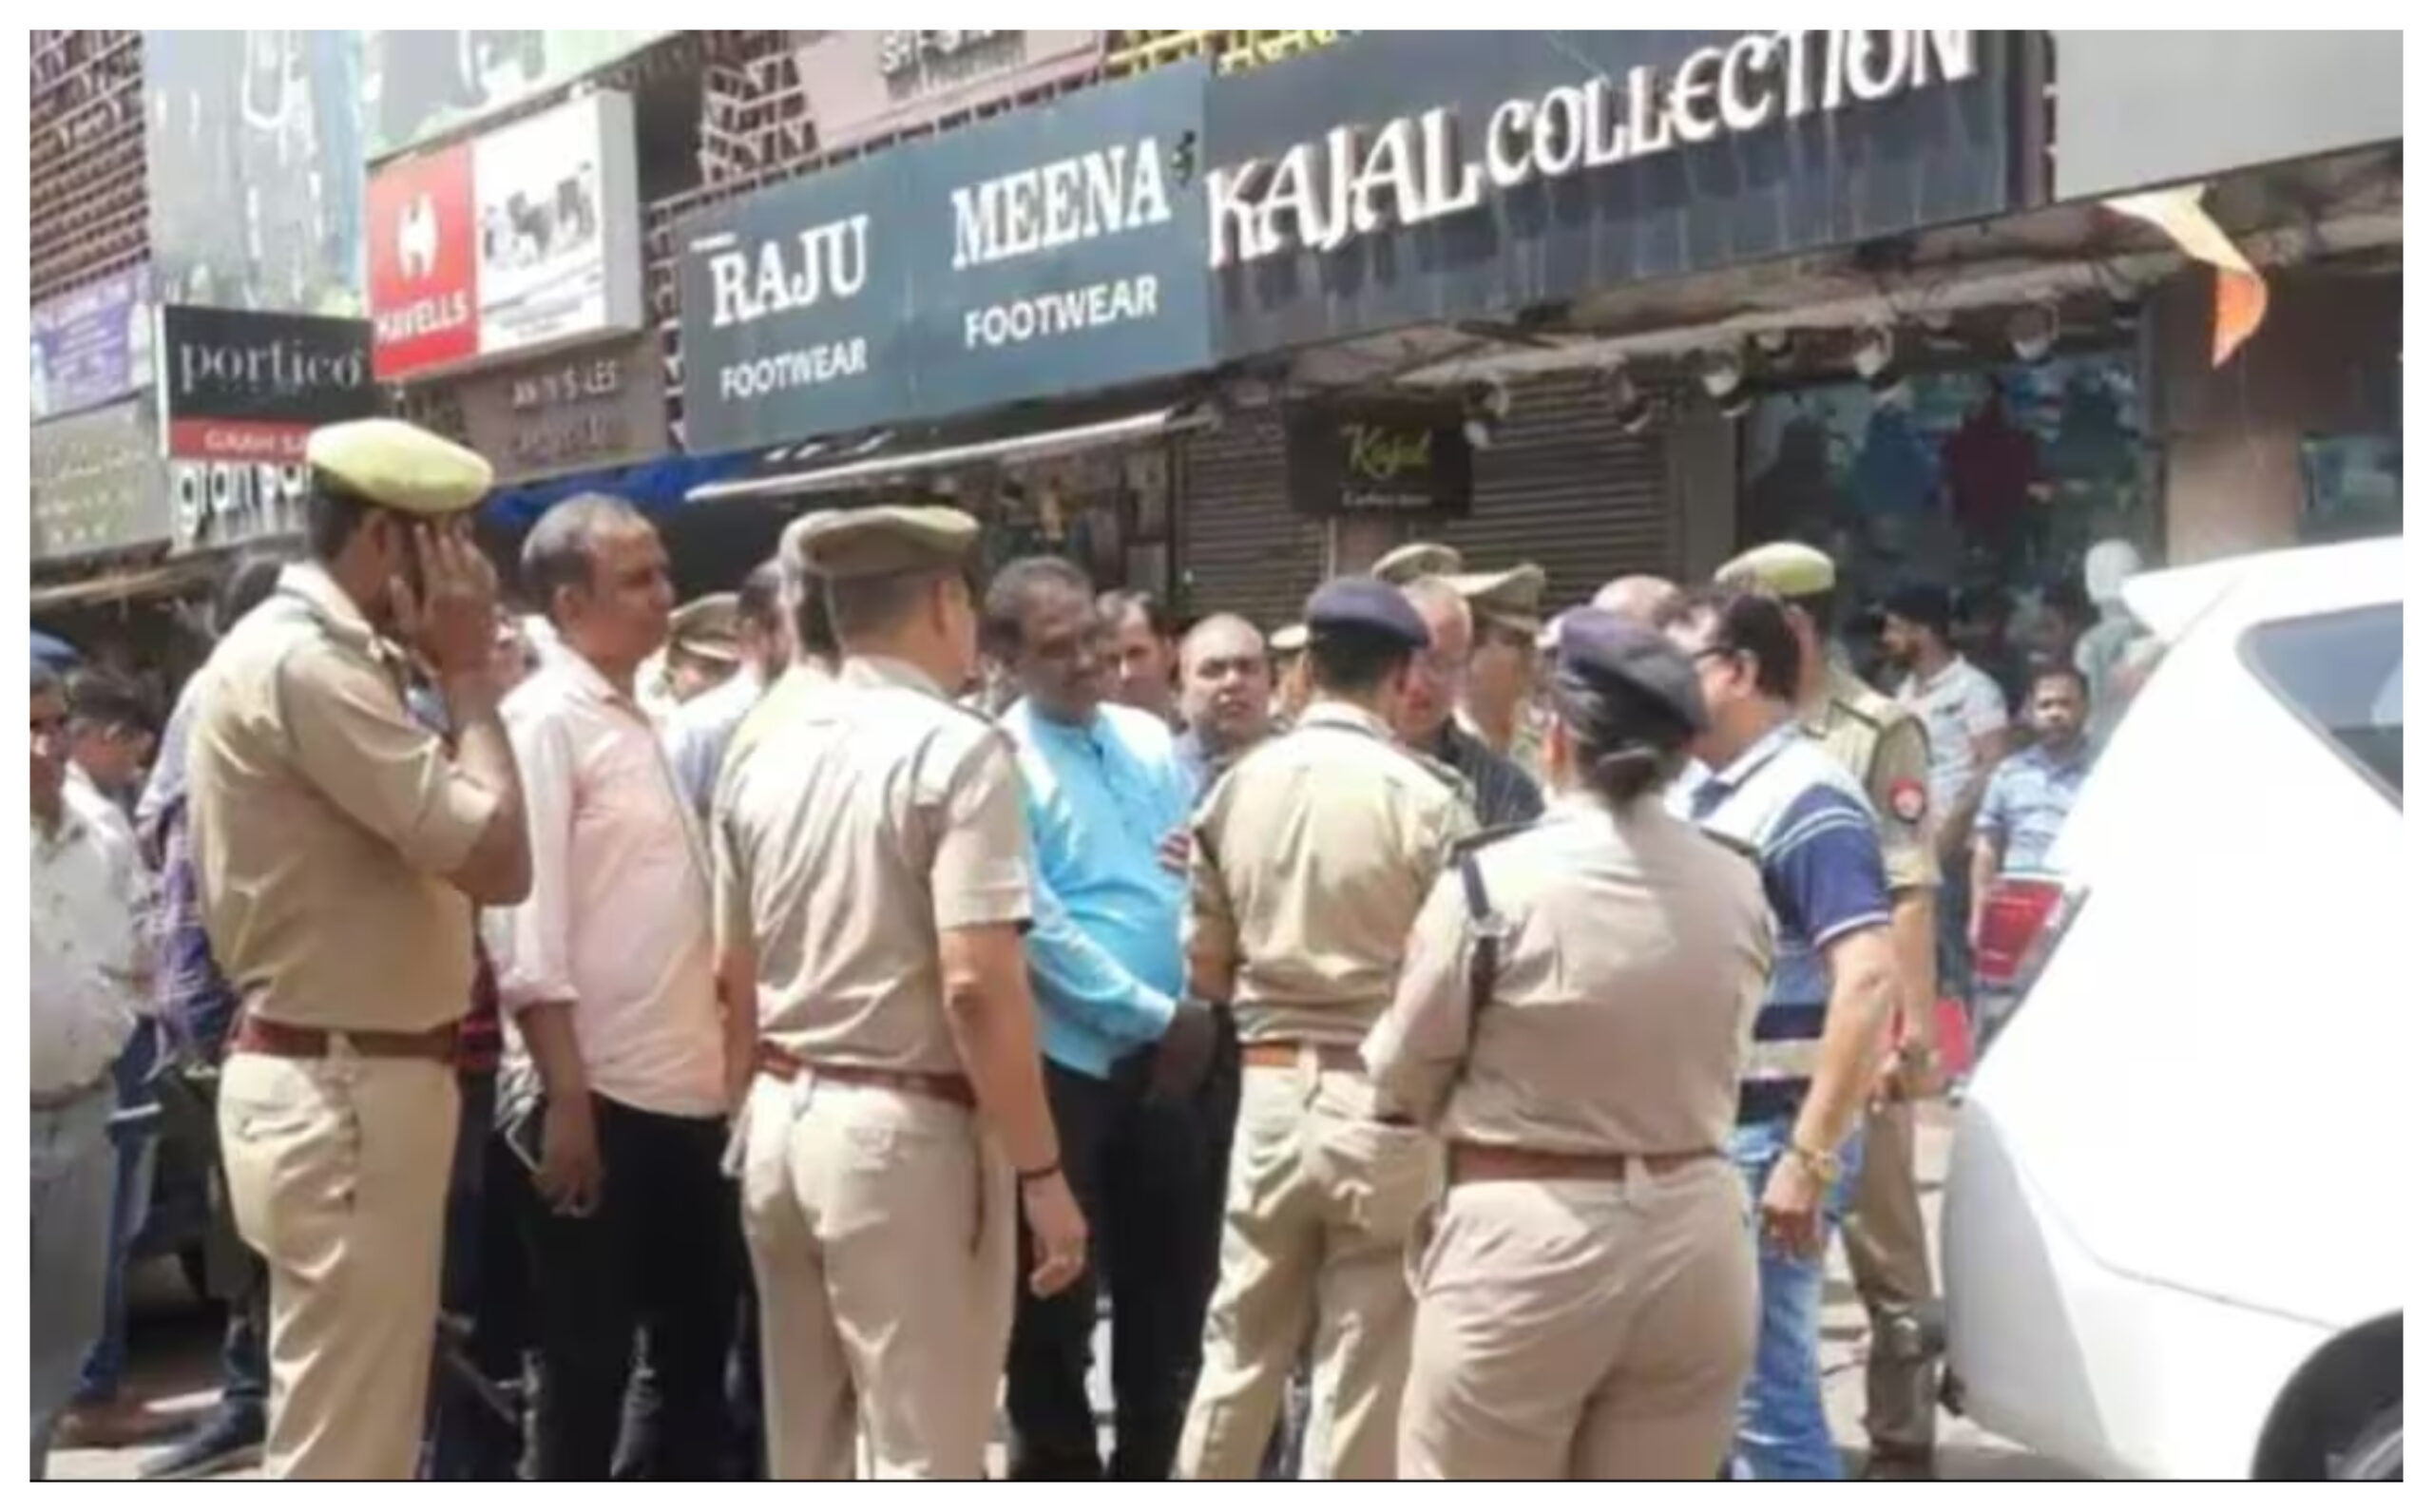 Uttar Pradesh: A minor working at a shop attacked the owner with a knife, condition critical